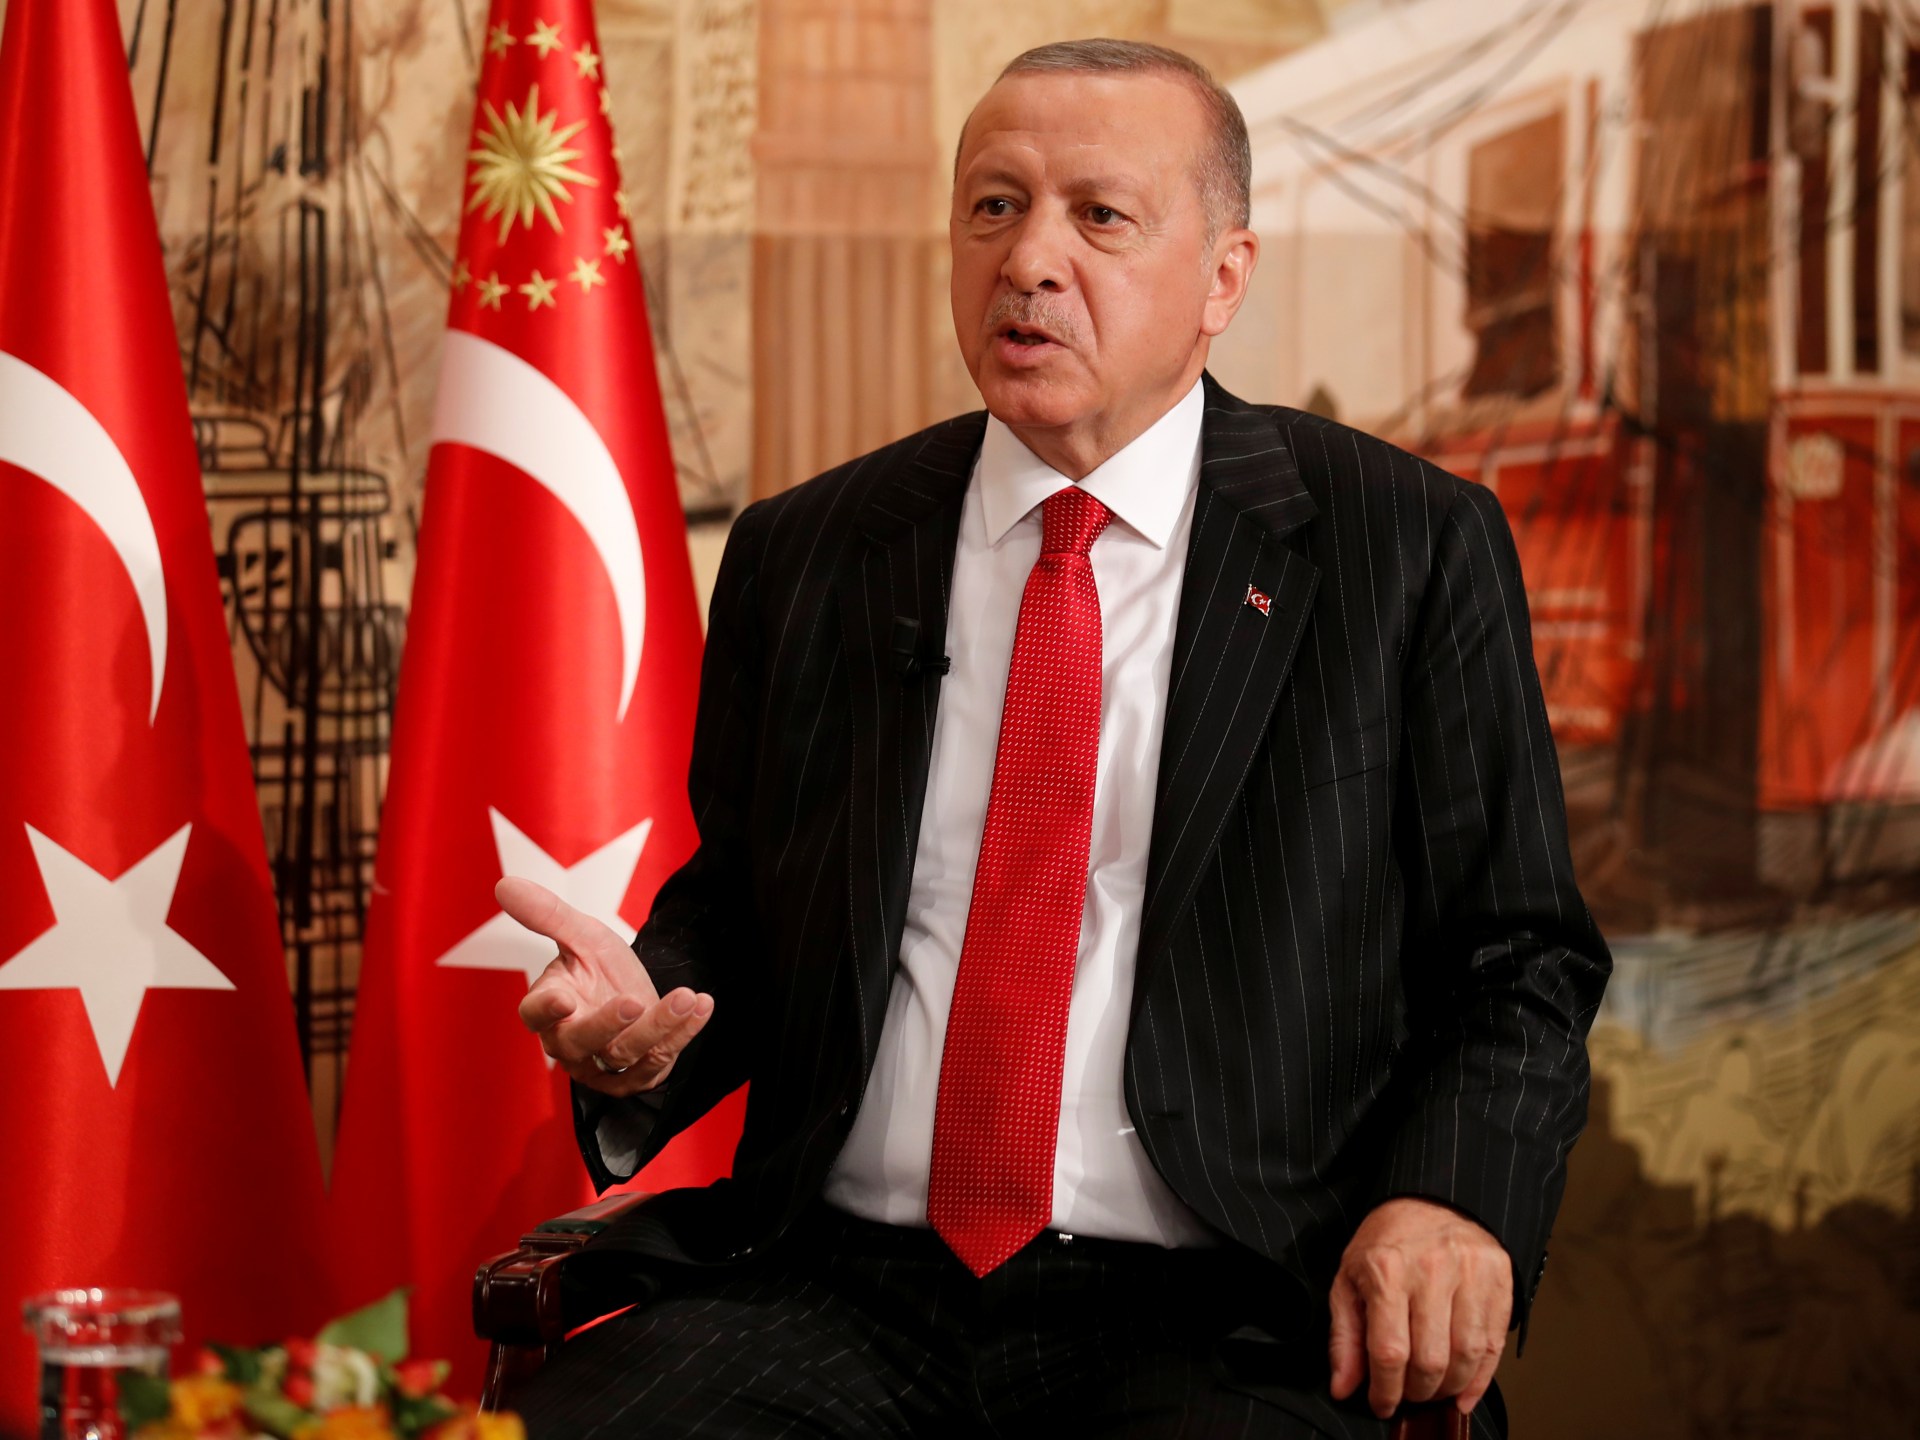 Is Turkey uniquely positioned to mediate between Palestinians and Israel? | Recep Tayyip Erdogan News